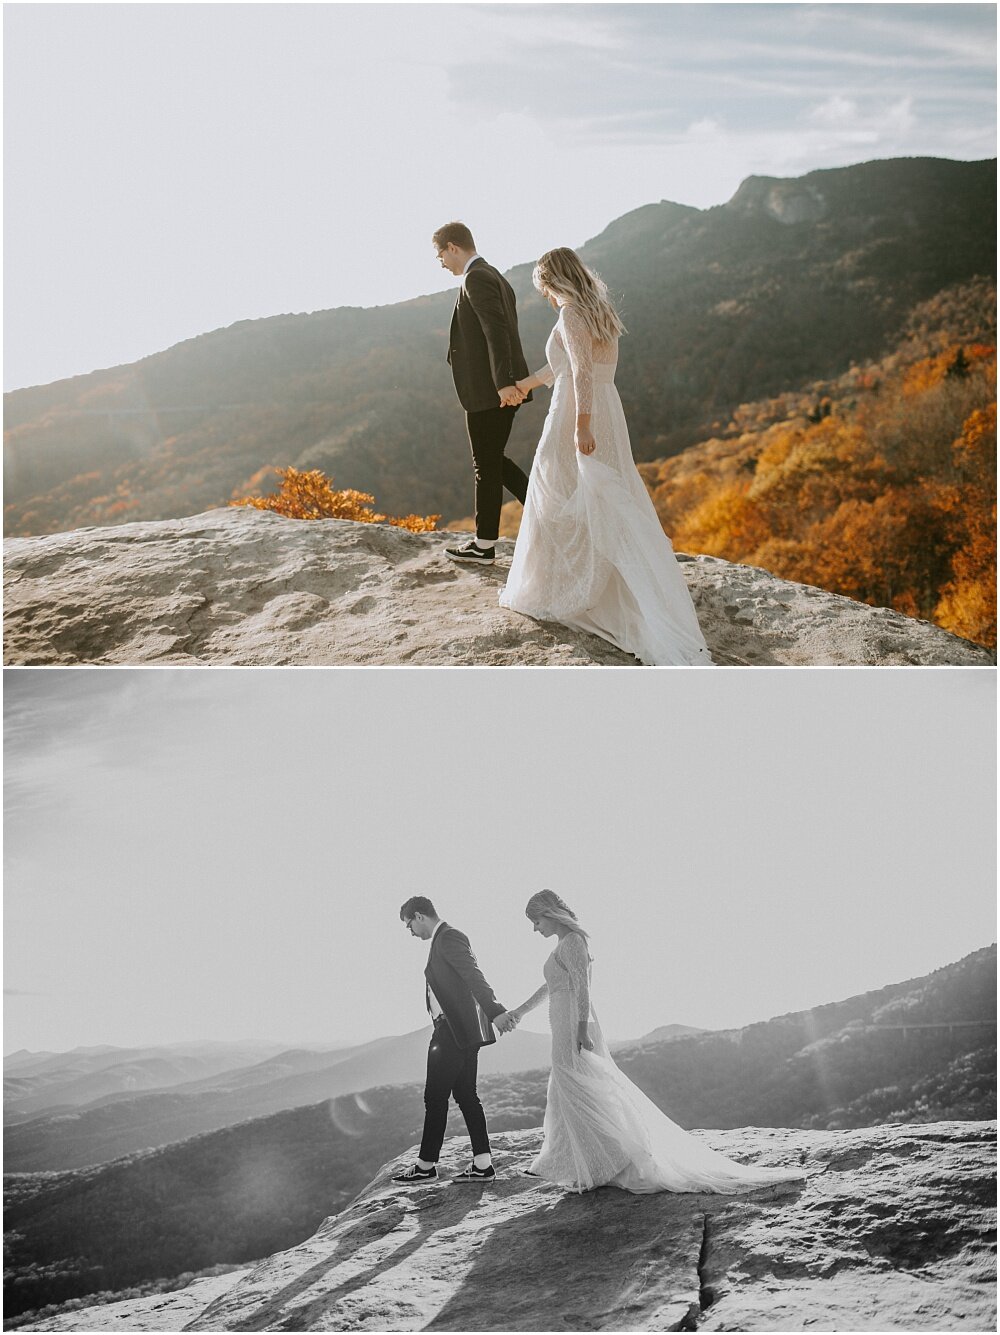 Bride and groom on the mountain.